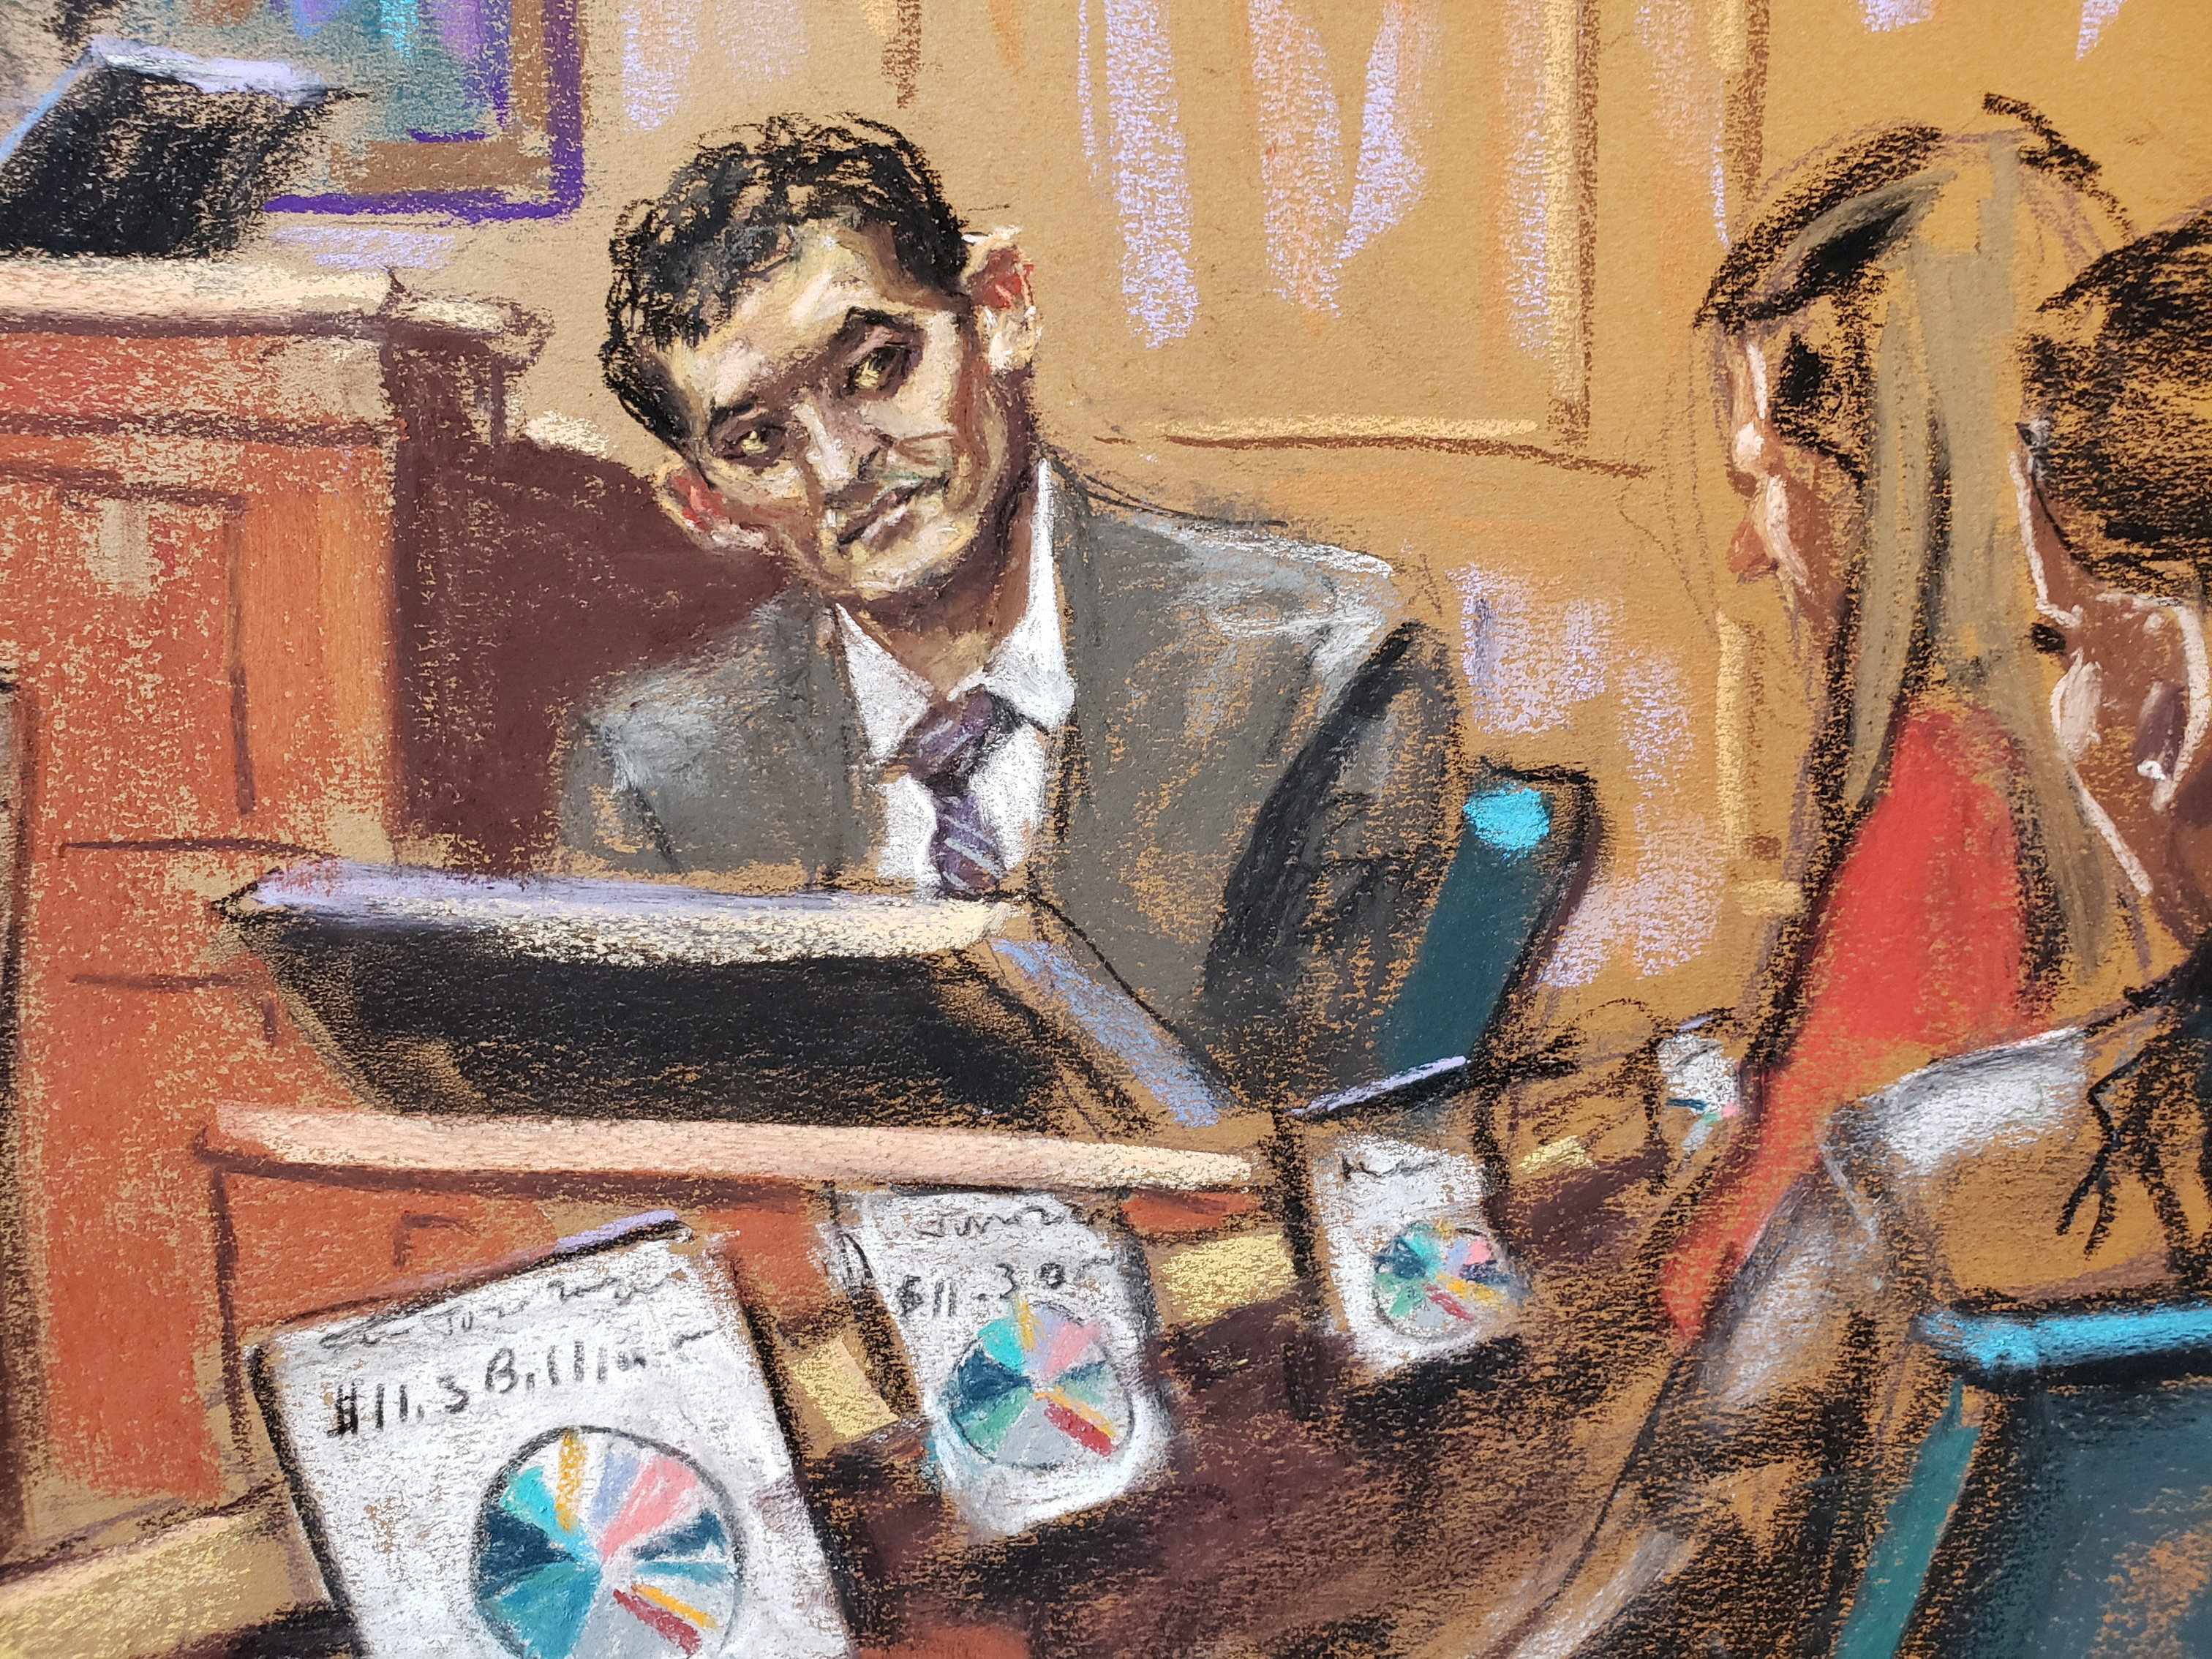 FTX founder Sam Bankman-Fried is questioned in court in New York on Tuesday. Courtroom sketch: Jane Rosenberg via Reuters